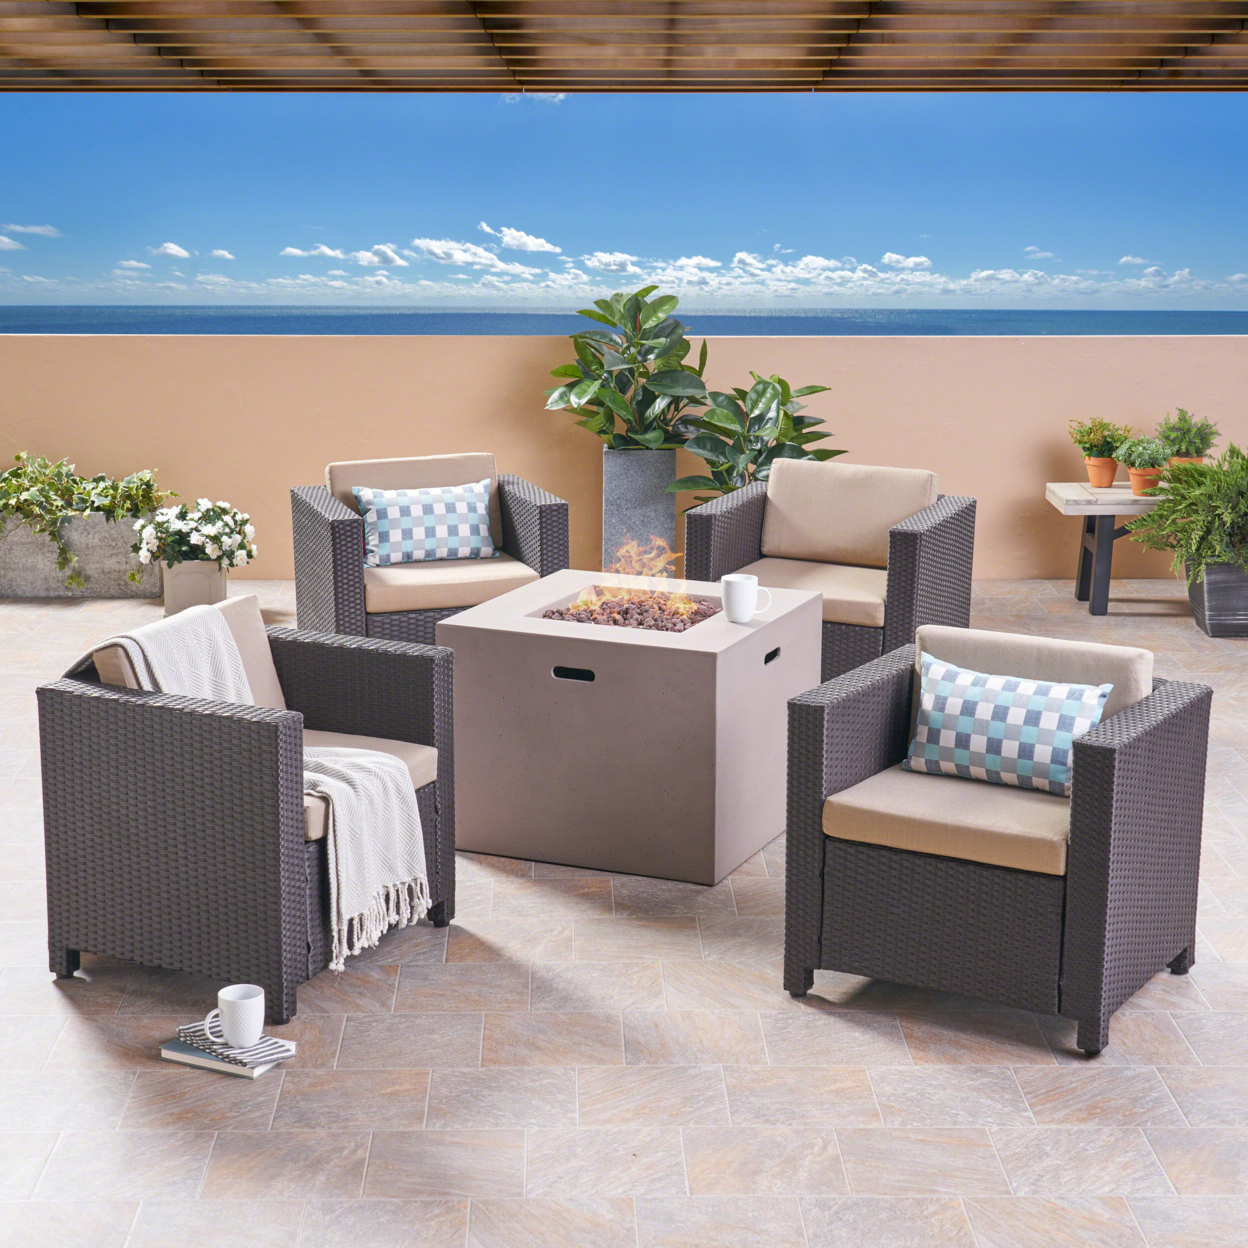 Icey Outdoor 4 Piece Club Chair Set With Square Fire Pit - Dark Brown + Light Gray